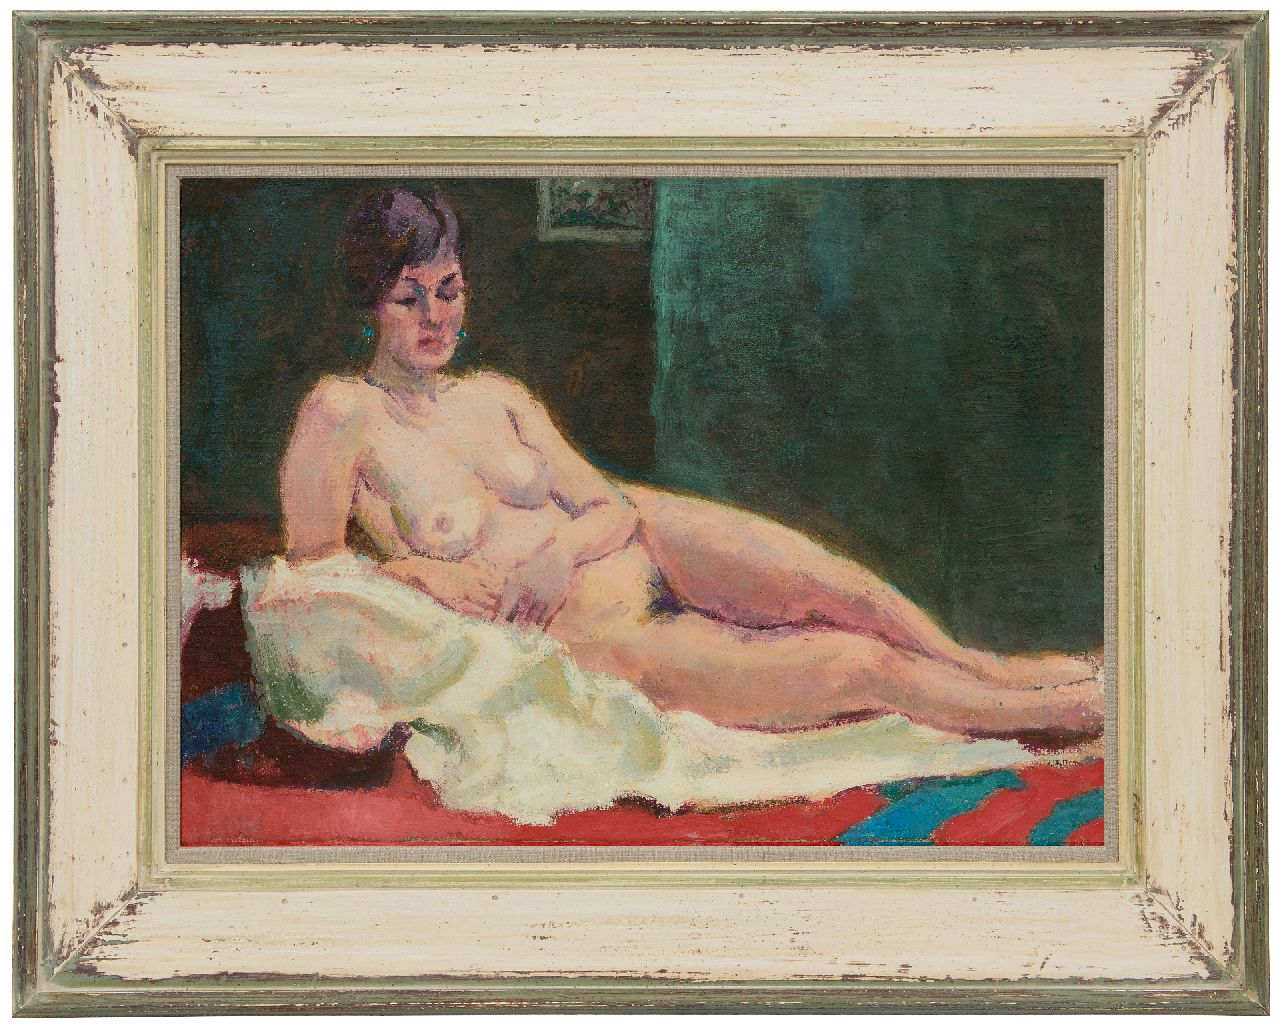 Altink J.  | Jan Altink | Paintings offered for sale | Lying nude, oil on canvas 49.9 x 70.4 cm